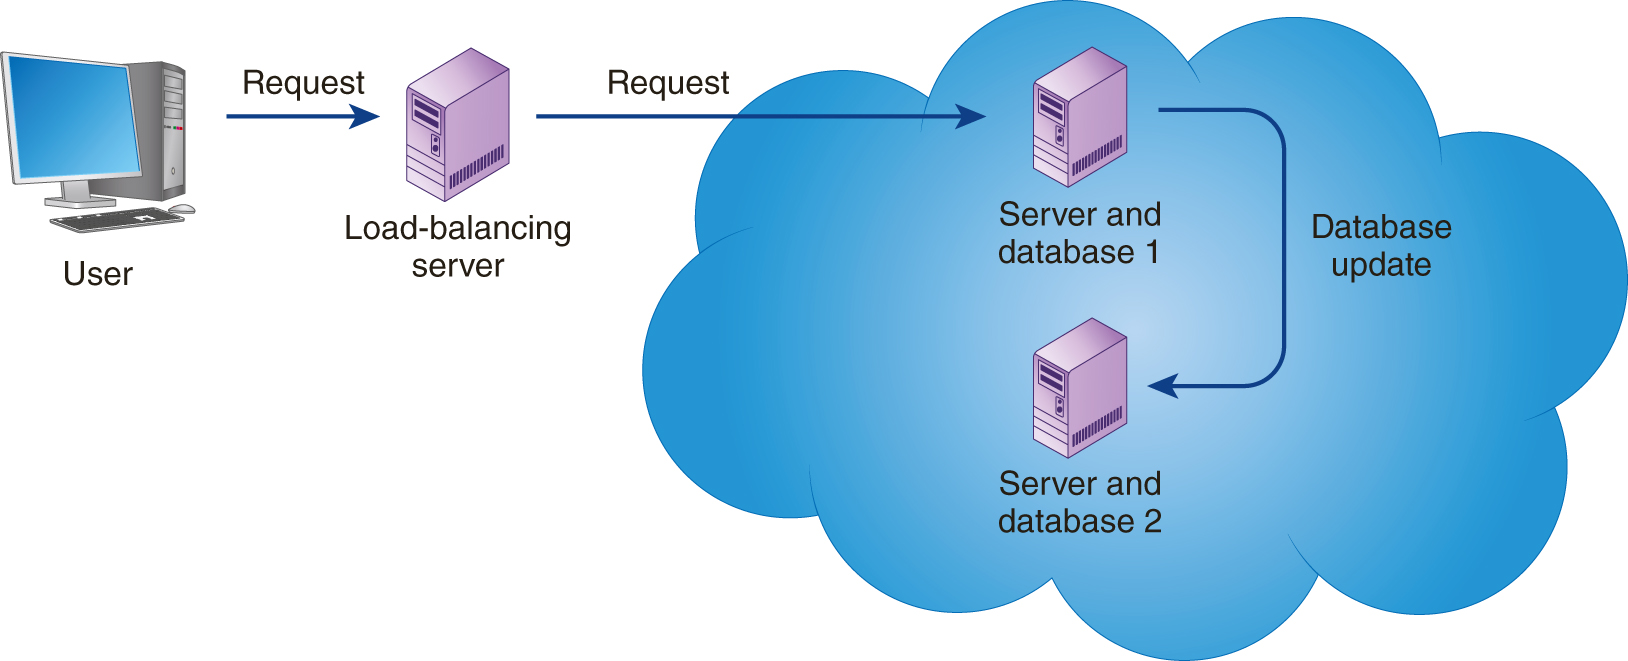 A system representing a user sends a request to a load balancing server, which in turn directs the request to server and database 1 placed in a large cloud. Database update is directed from server and database 1 to server and database 2 in the same cloud.
